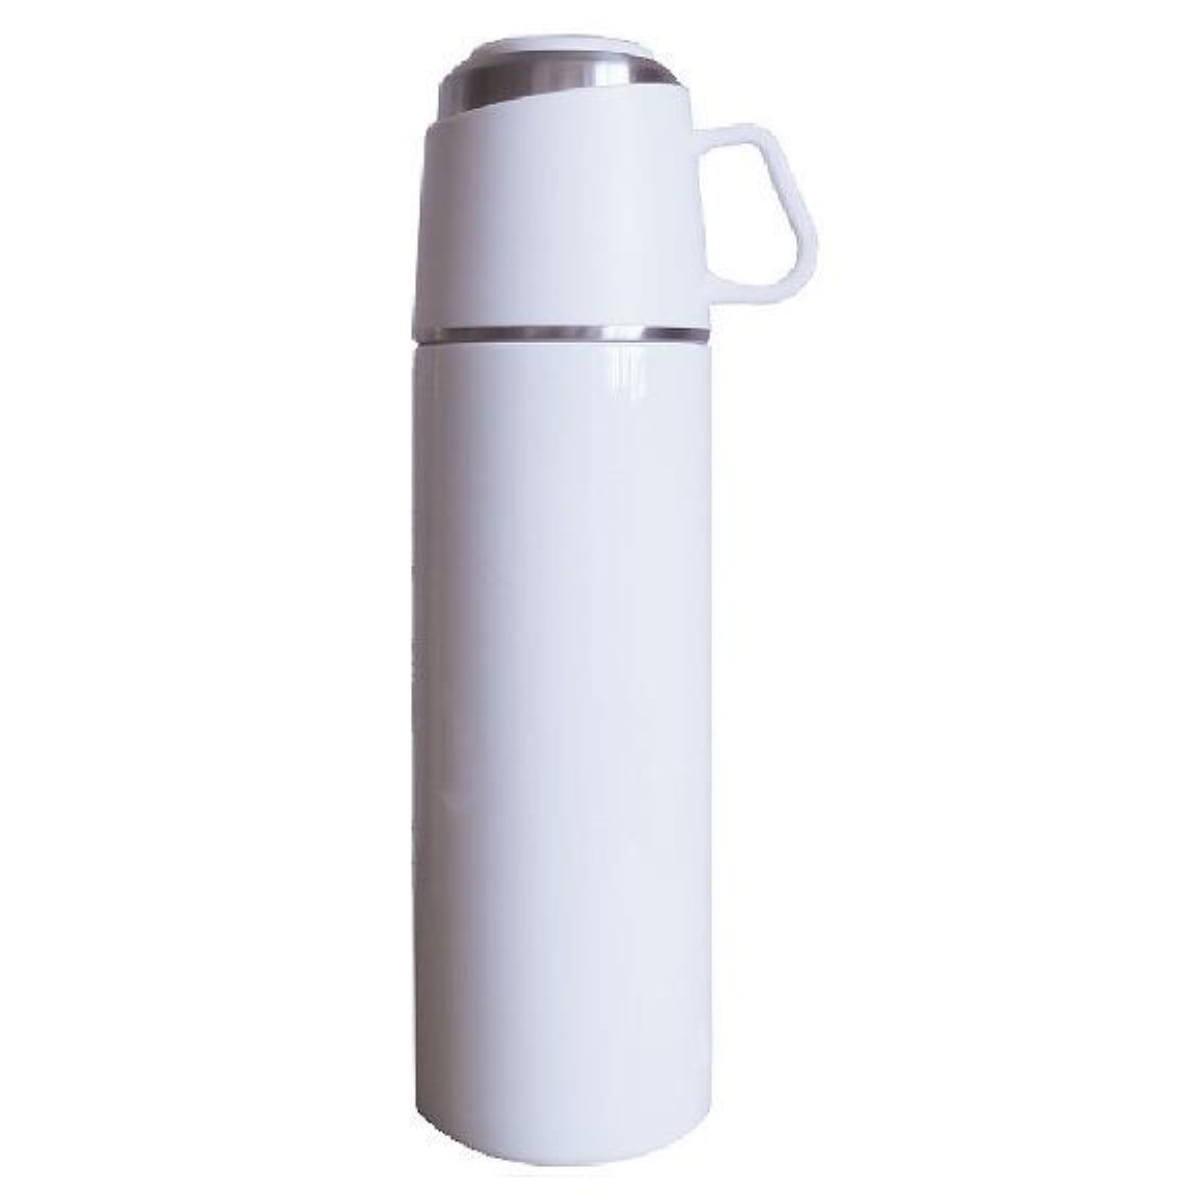   Rbv 2way ROCCO One PushCup Bottle 500ml i ۉ ۗ  }O{g Rbvt XeX t }O XeX{g Xg[i[  t Rbv Jt  j yAC{[z